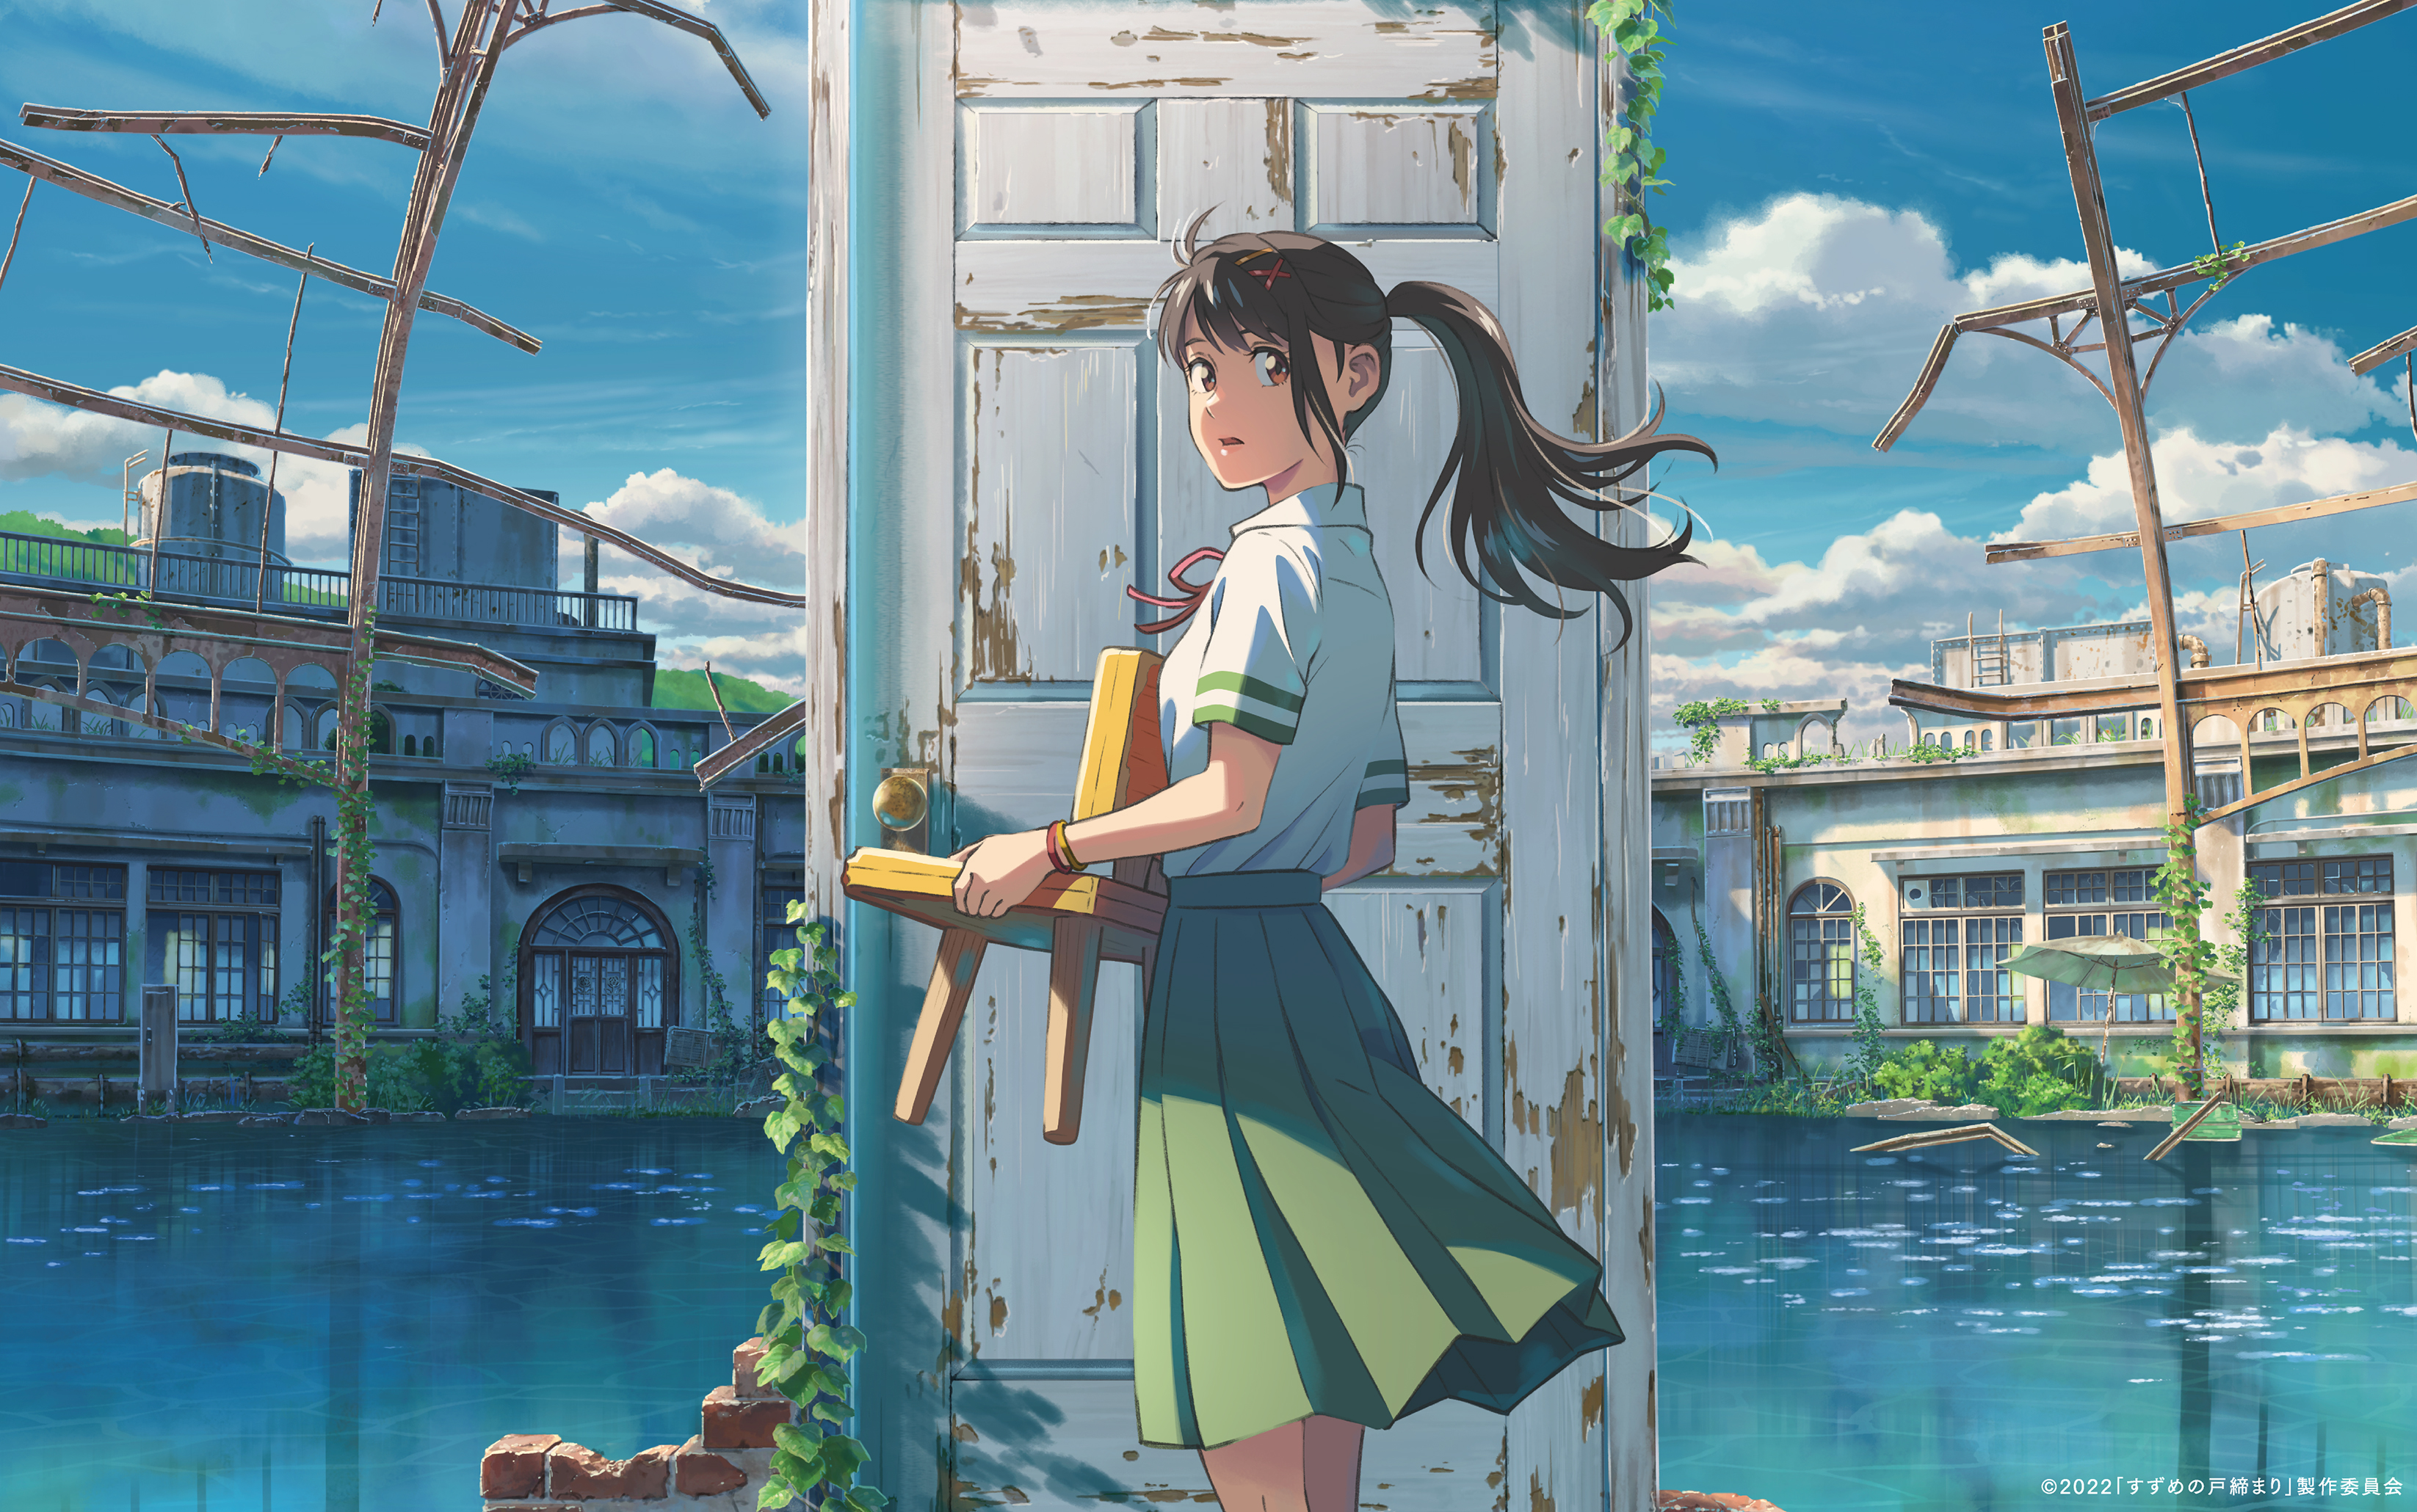 Suzume standing in front of a door in a promotional poster for the film. Image courtesy of Toho Co., Ltd